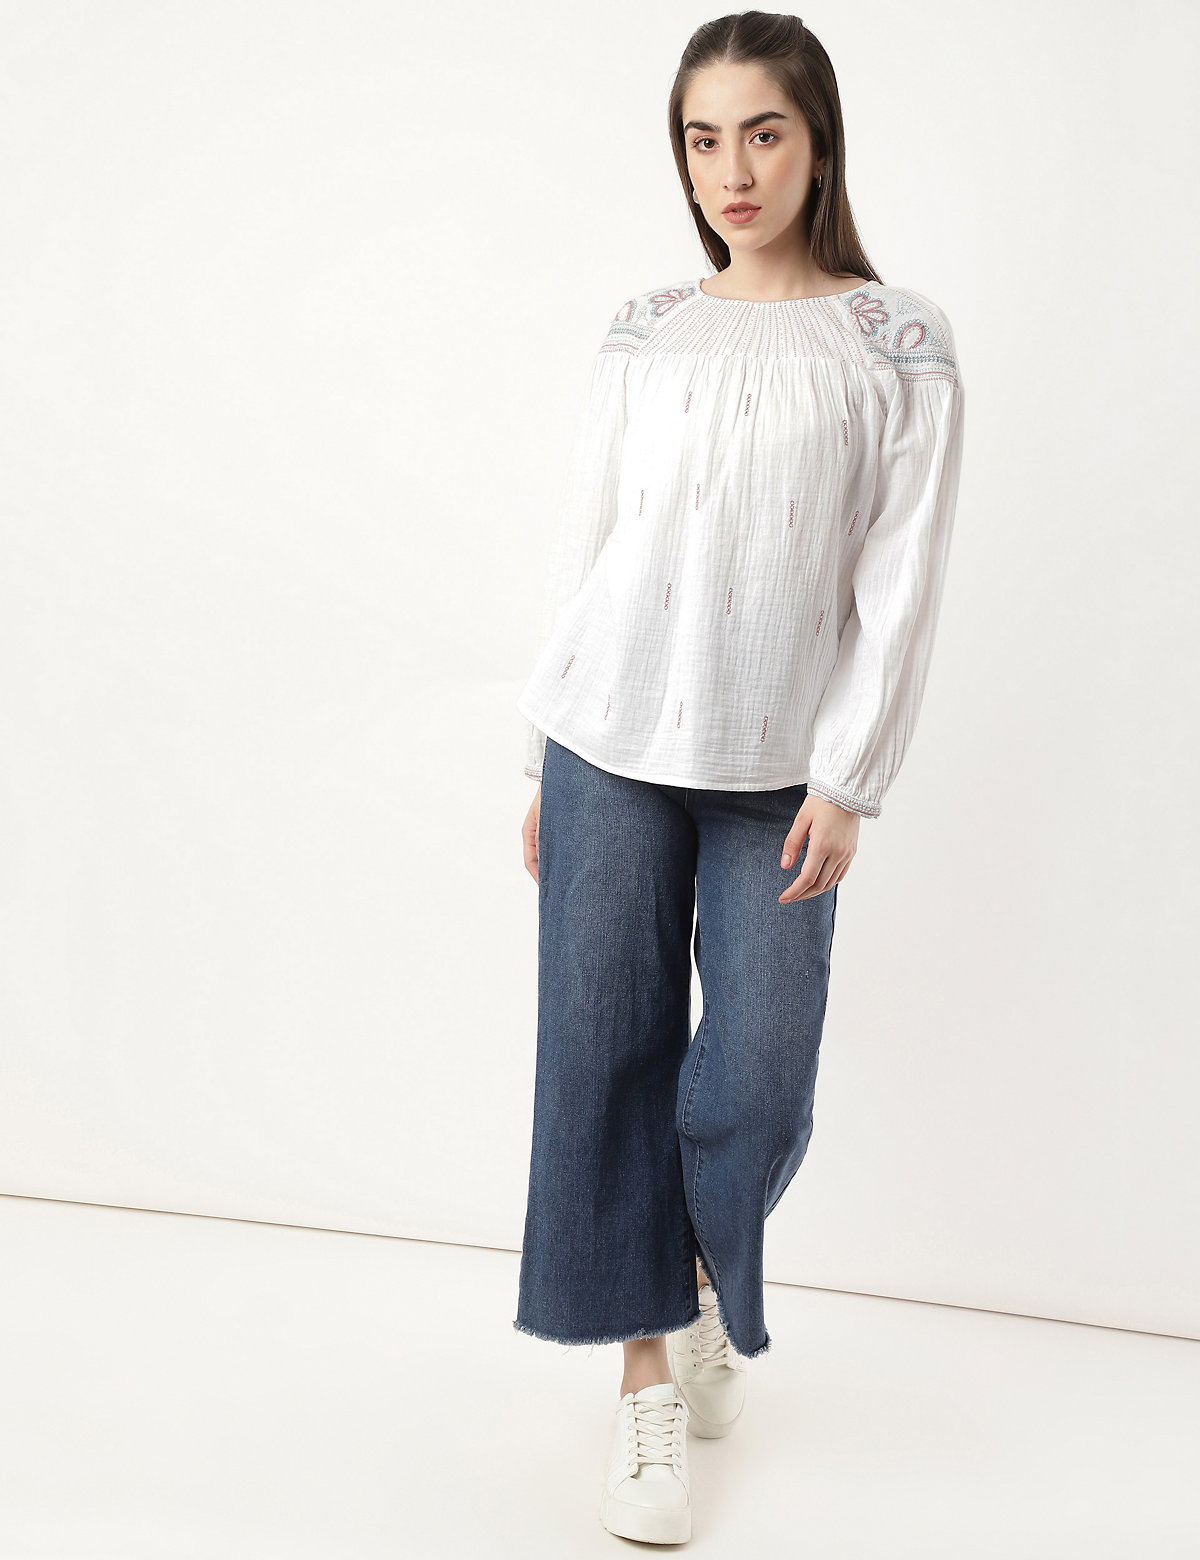 Pure Cotton Embroidery Round Neck Blouse